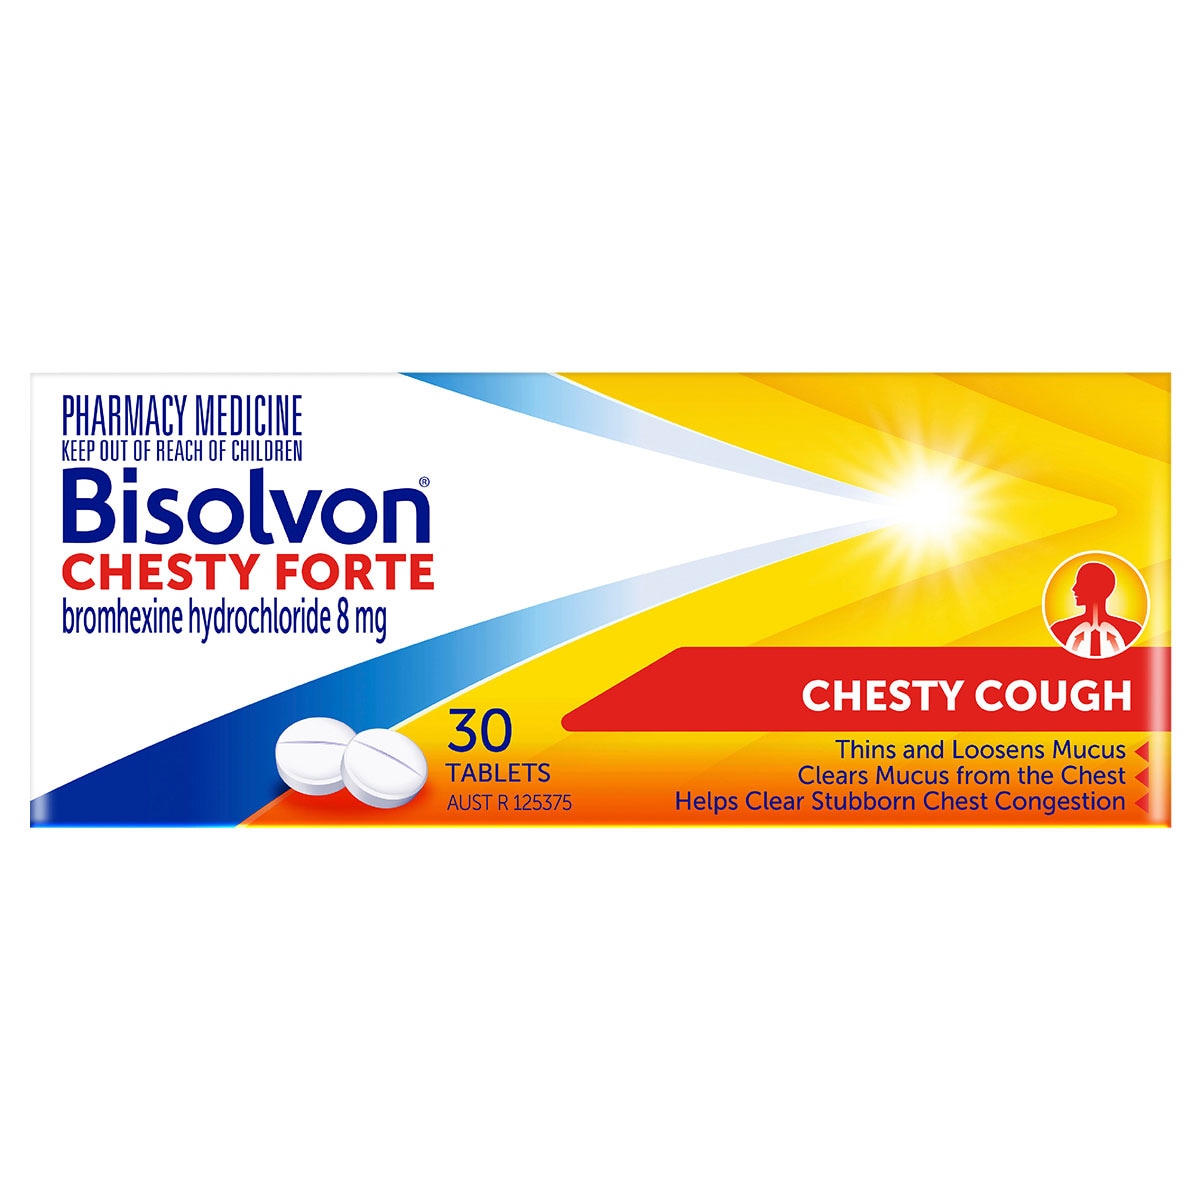 Bisolvon Chesty Forte Cough Tablets 30 Pack